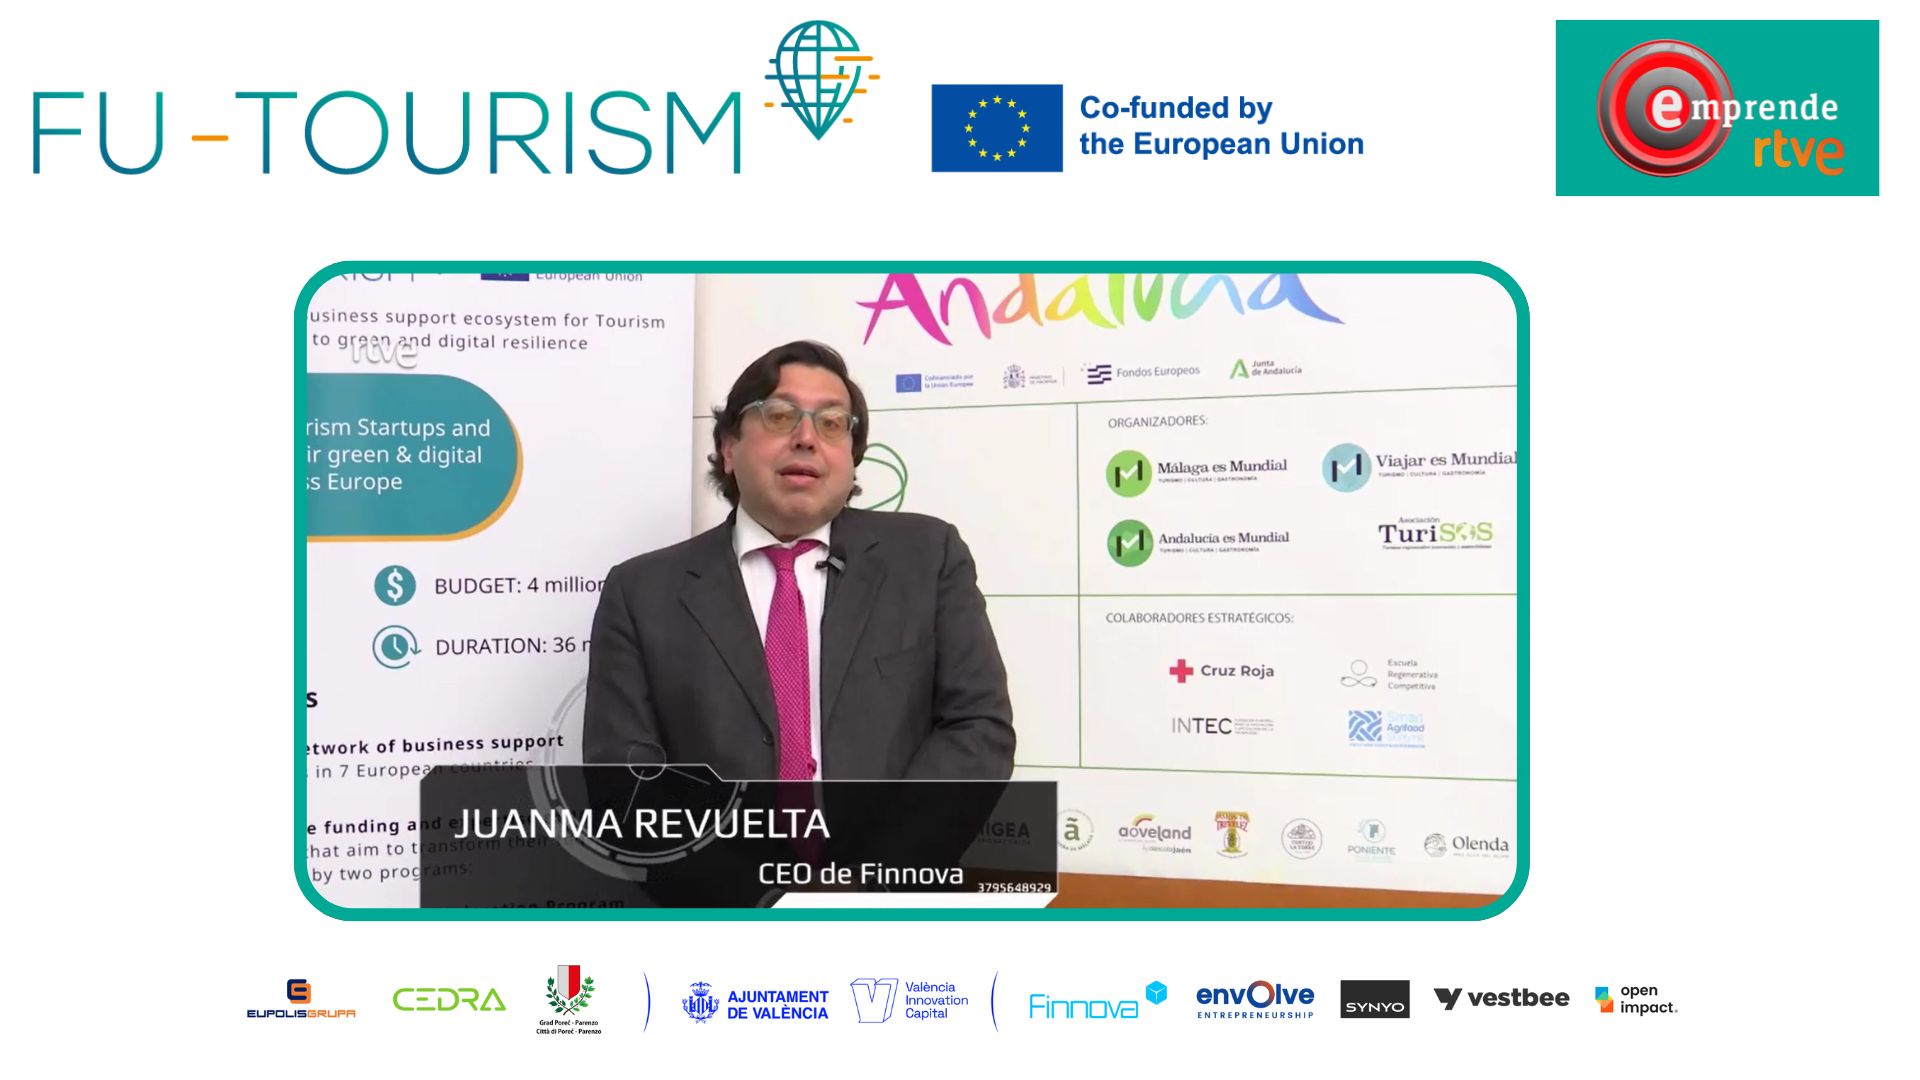 Emprende TVE reports on the upcoming launch of the Acceleration Programme of the European project FU-TOURISM